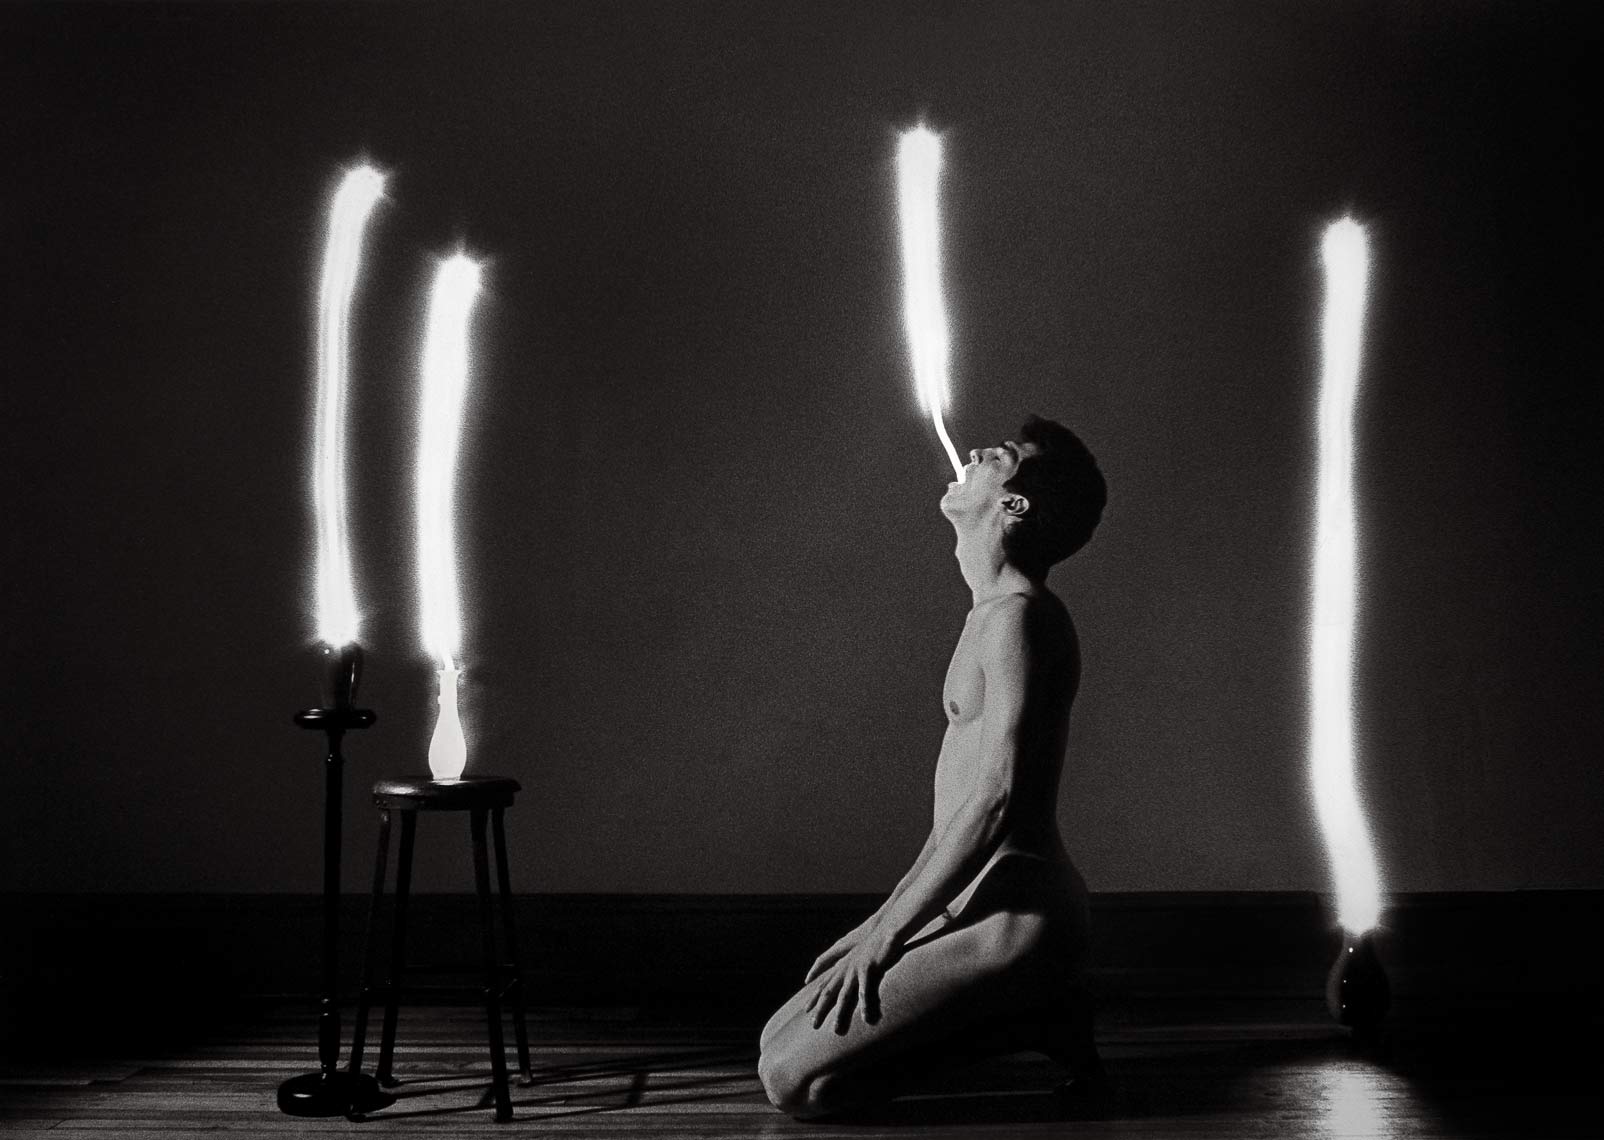 The Light Eater, male nude, 1983, light drawing, black and white photograph